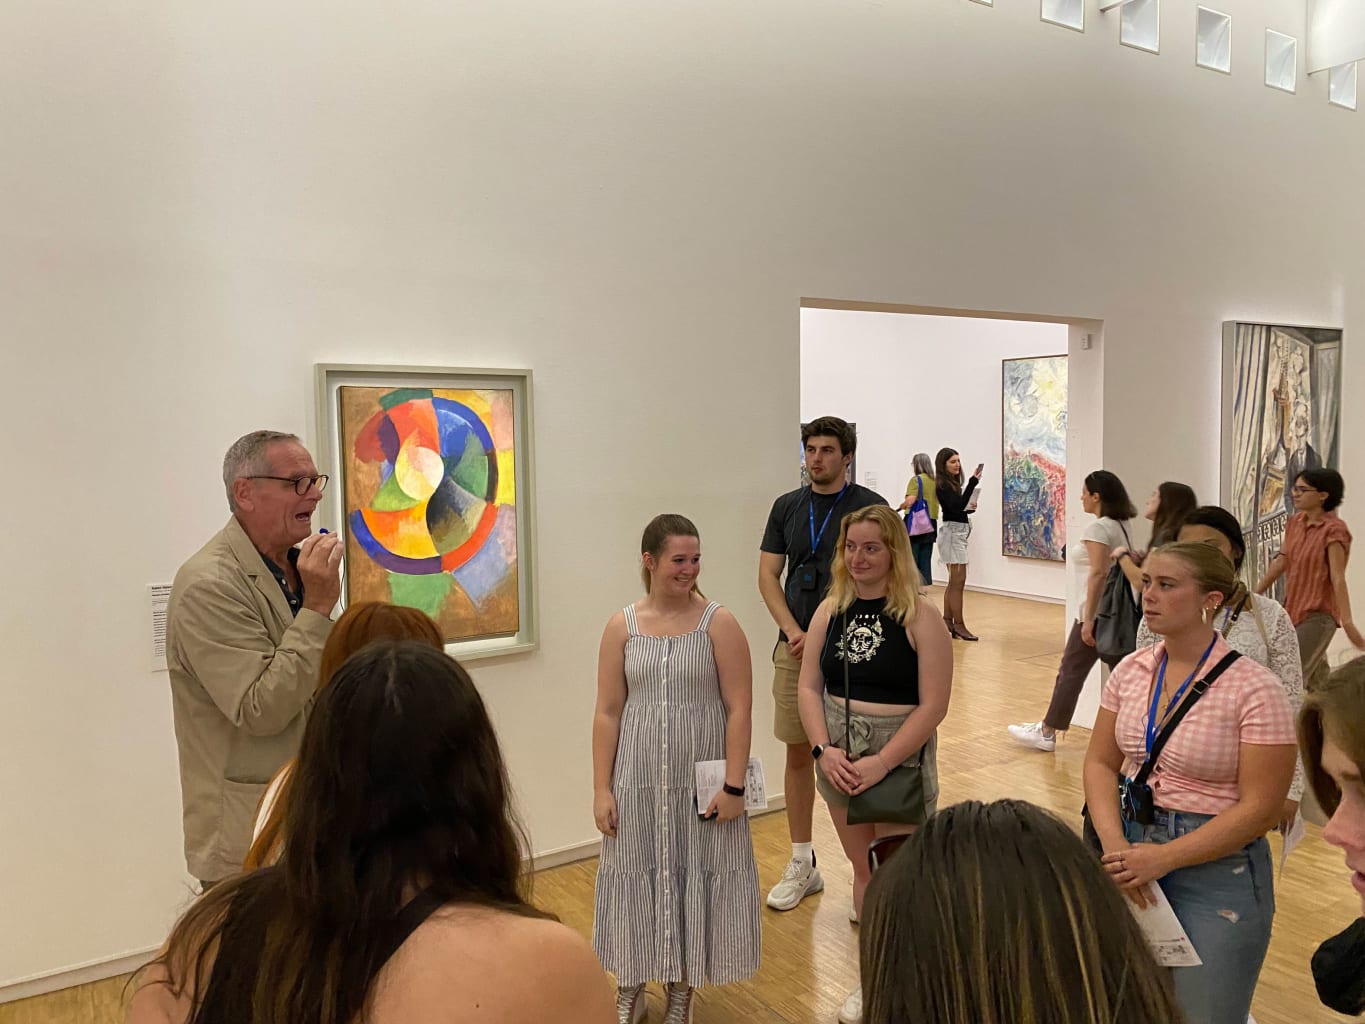 A group of students on a tour in an art museum.